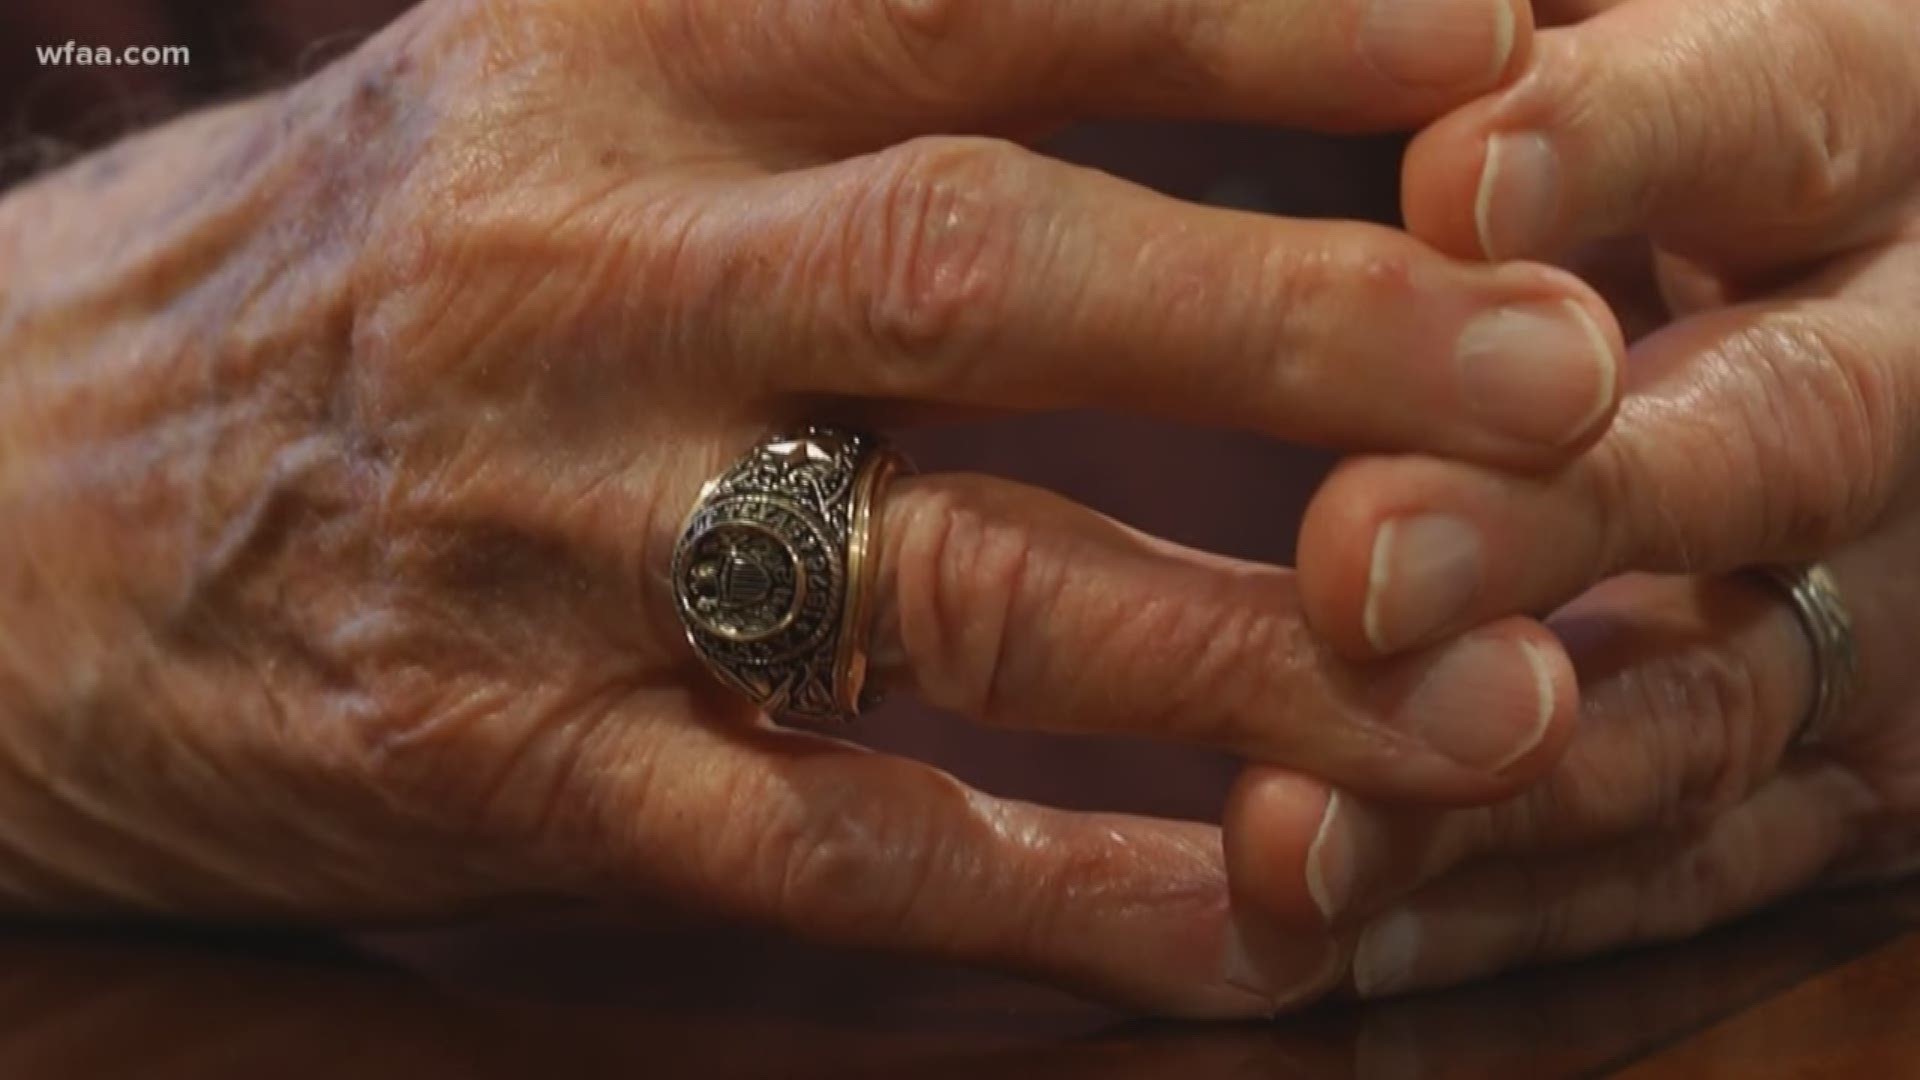 Of all the titles 98-year-old Bob Warren has had, “Aggie” might be his favorite. His lost his beloved Aggie ring in December, but thanks to a Facebook post and a generous manufacturer, a replacement has arrived.